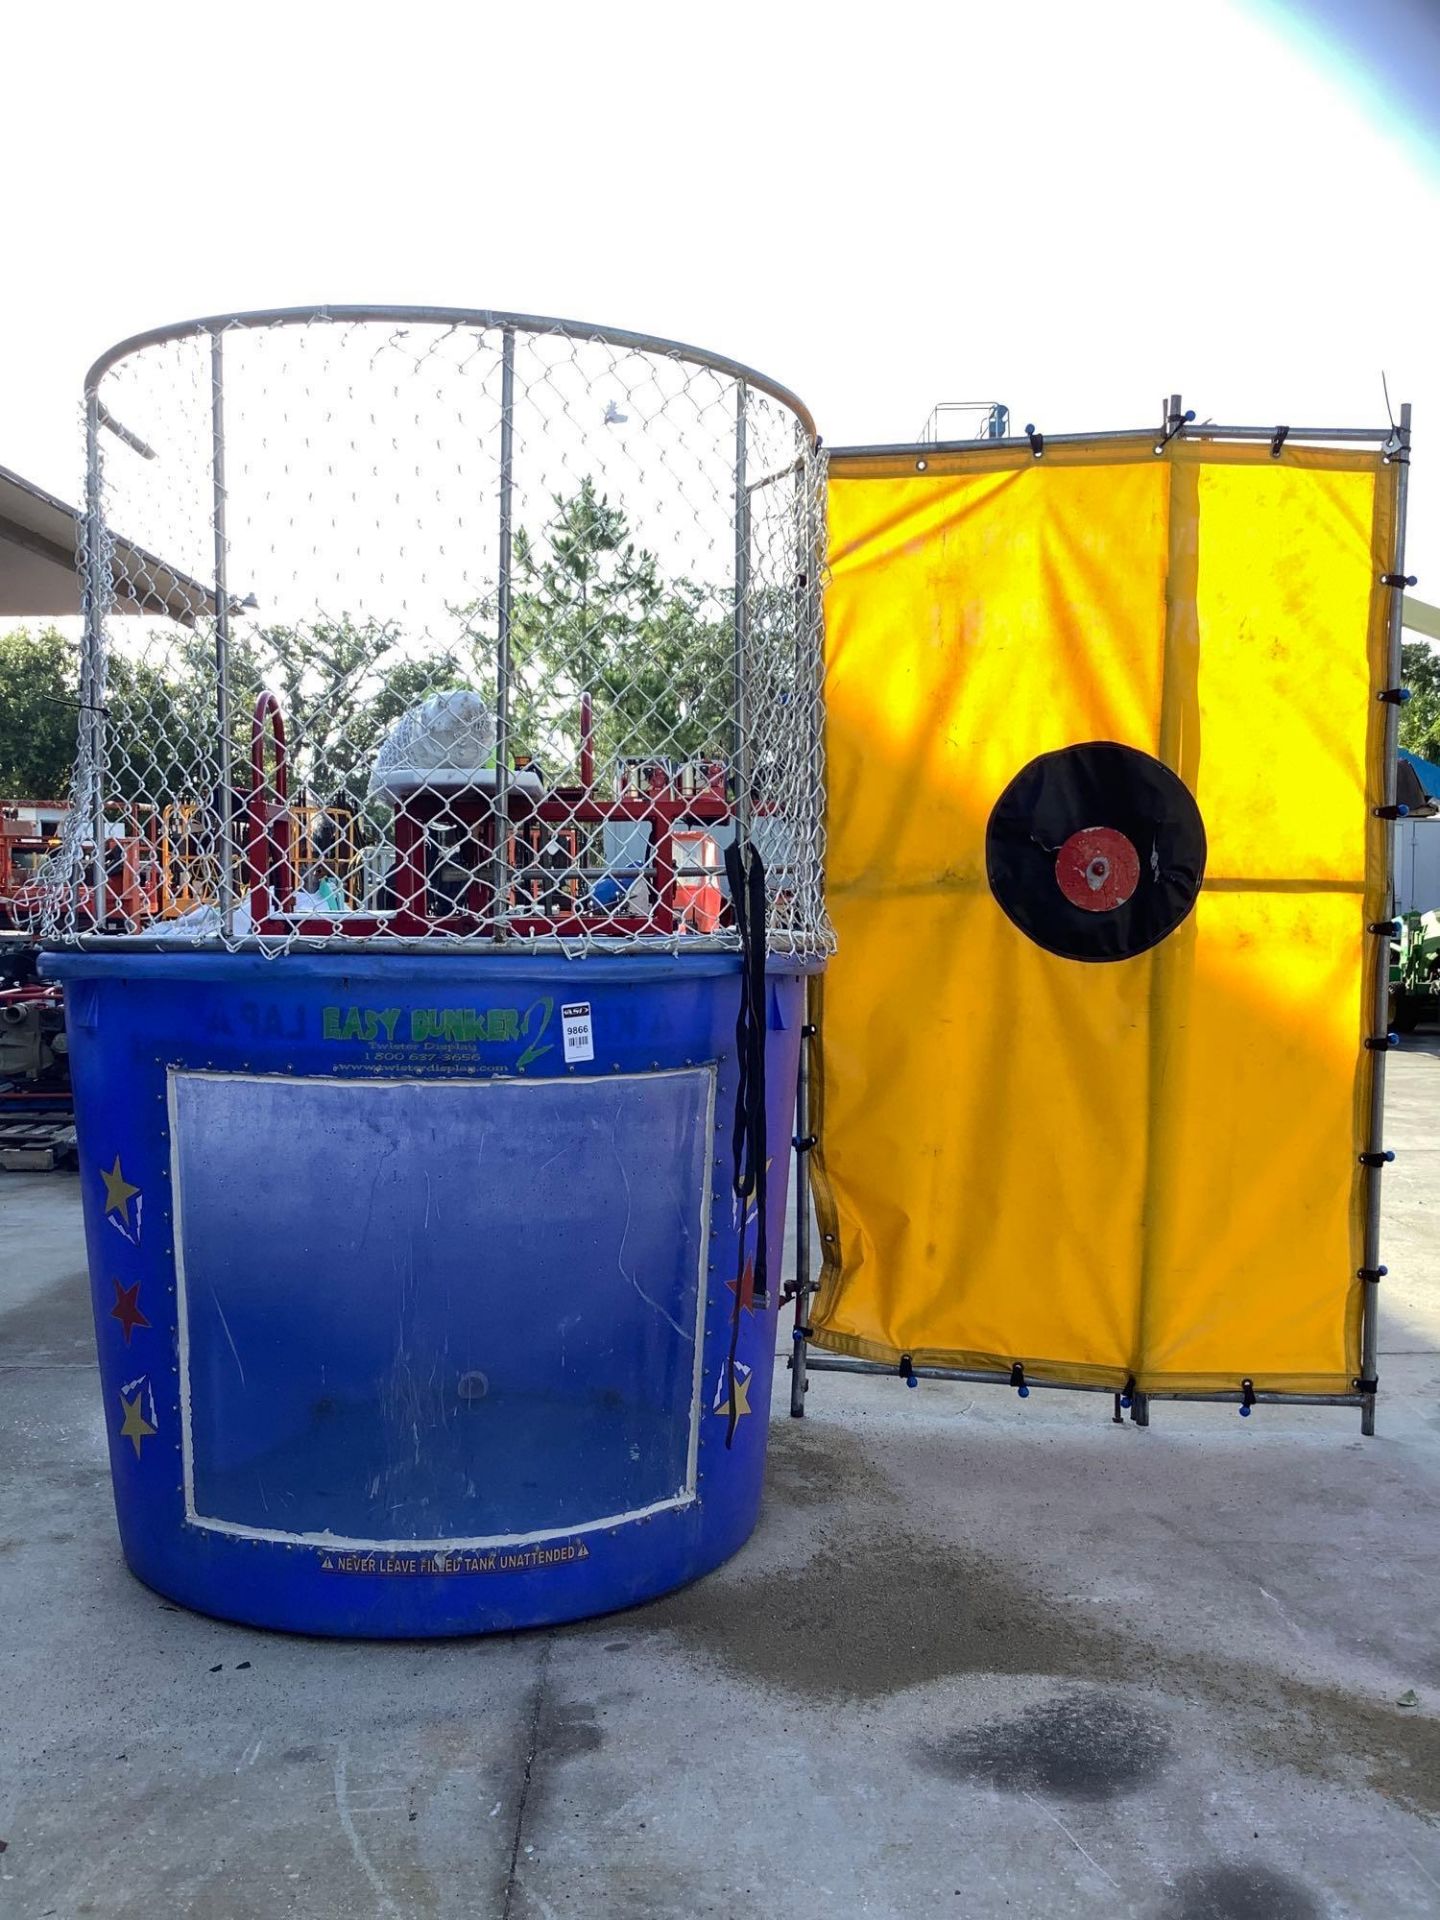 TWISTER DISPLAY EASY DUNKER 2 DUNK TANK, TRAILER MOUNTED - Image 3 of 20